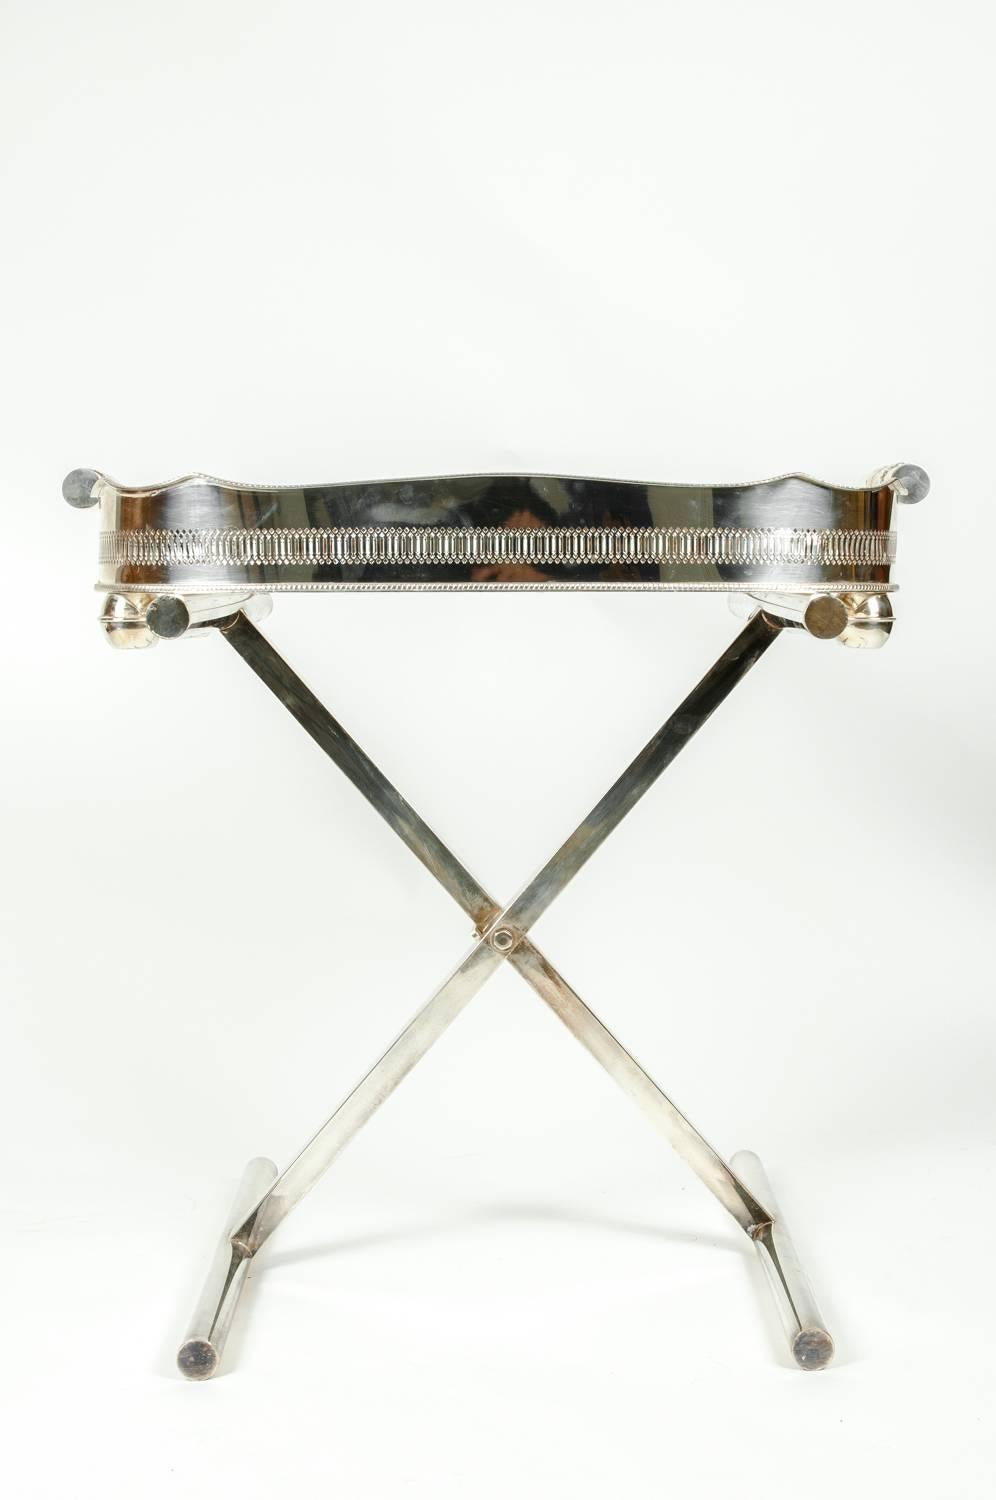 Beautiful mid-20th century English barware / serving tray with folding stand. The tray featured very high bordered gallery with two handles decorated with acanthus and center plaque for engraving purpose. The stand can be easily stored while not in